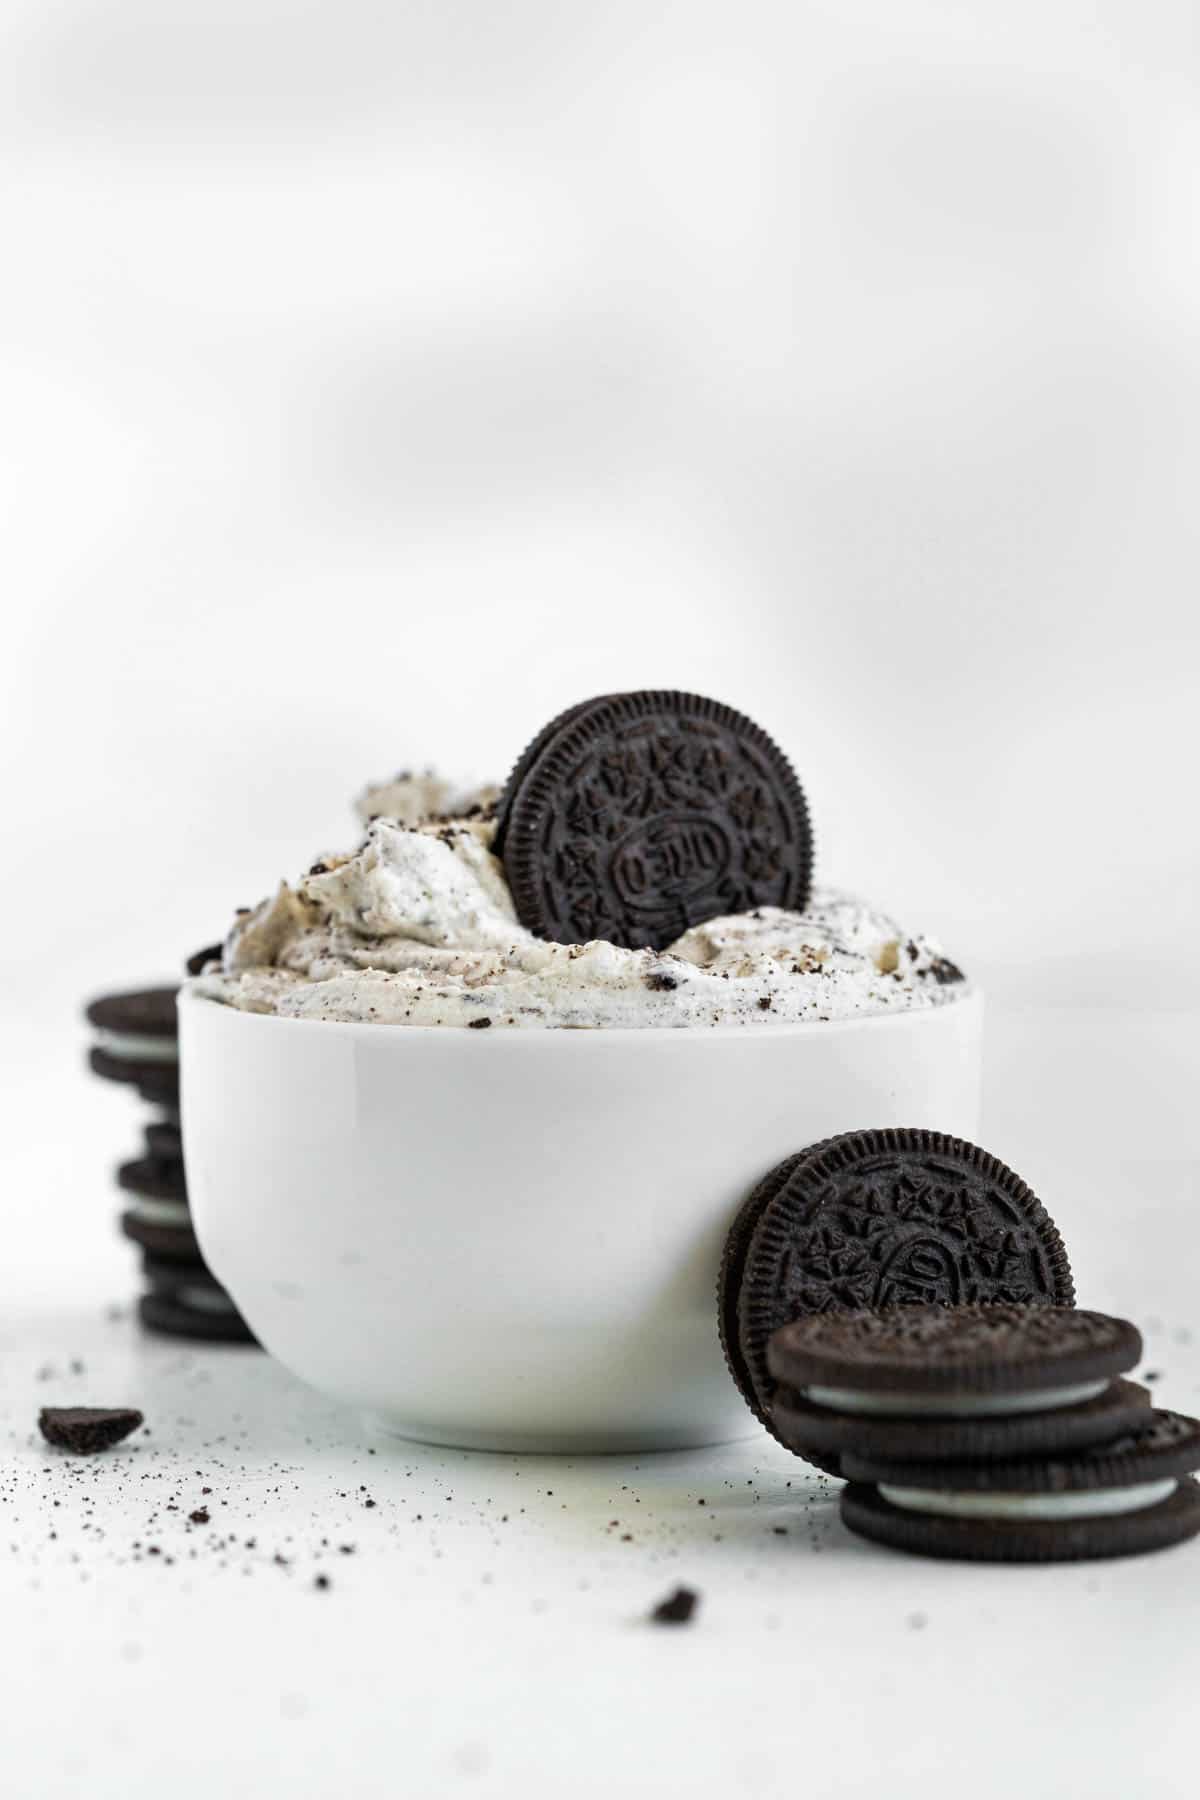 Oreo Dip in a white bowl with with Oreo cookies on a white table.